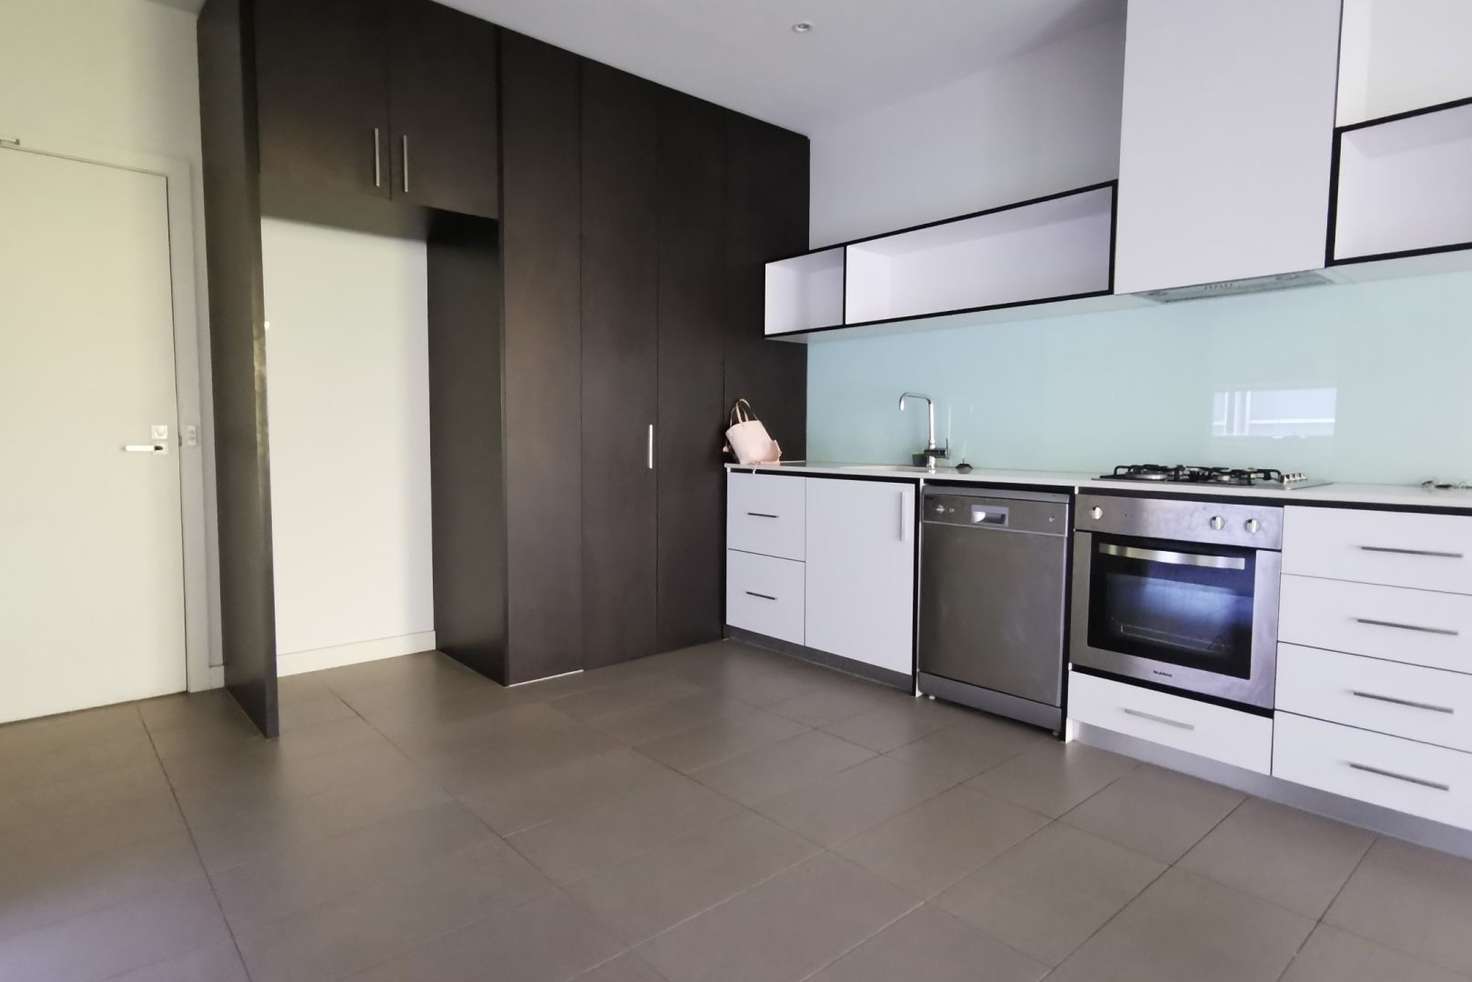 Main view of Homely apartment listing, 103/64 Macaulay Road, North Melbourne VIC 3051